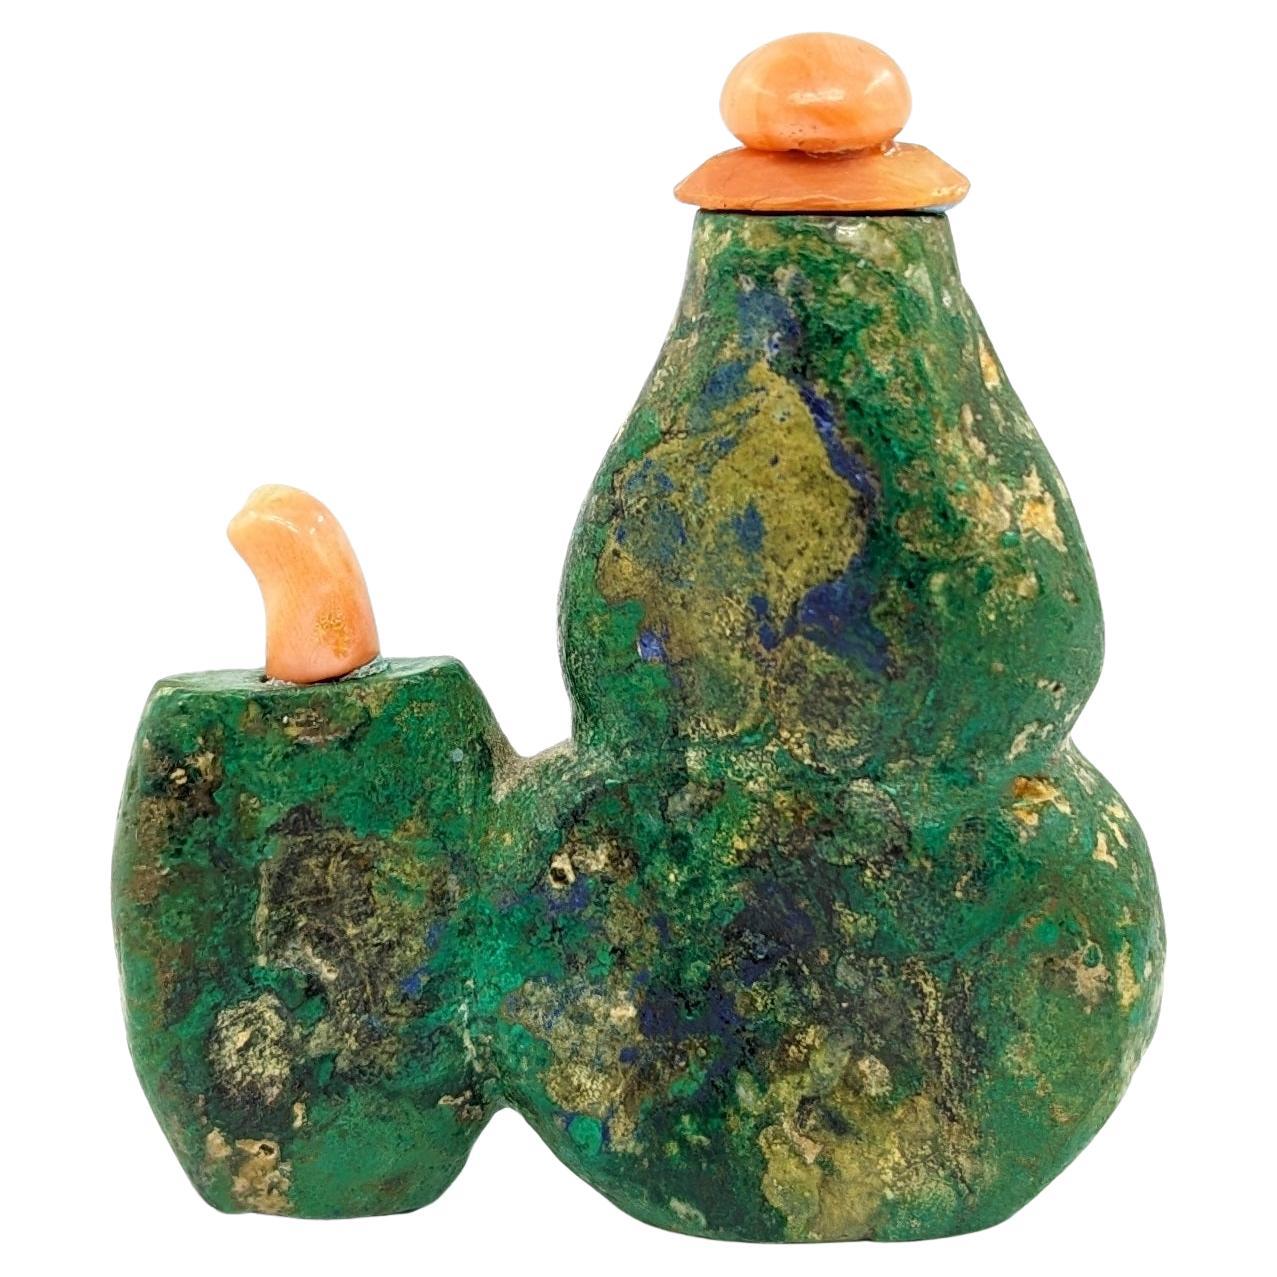 Hand-Carved Rare Antique Chinese Azurite Malachite Double Snuff Bottle 19c Qing Dynasty For Sale